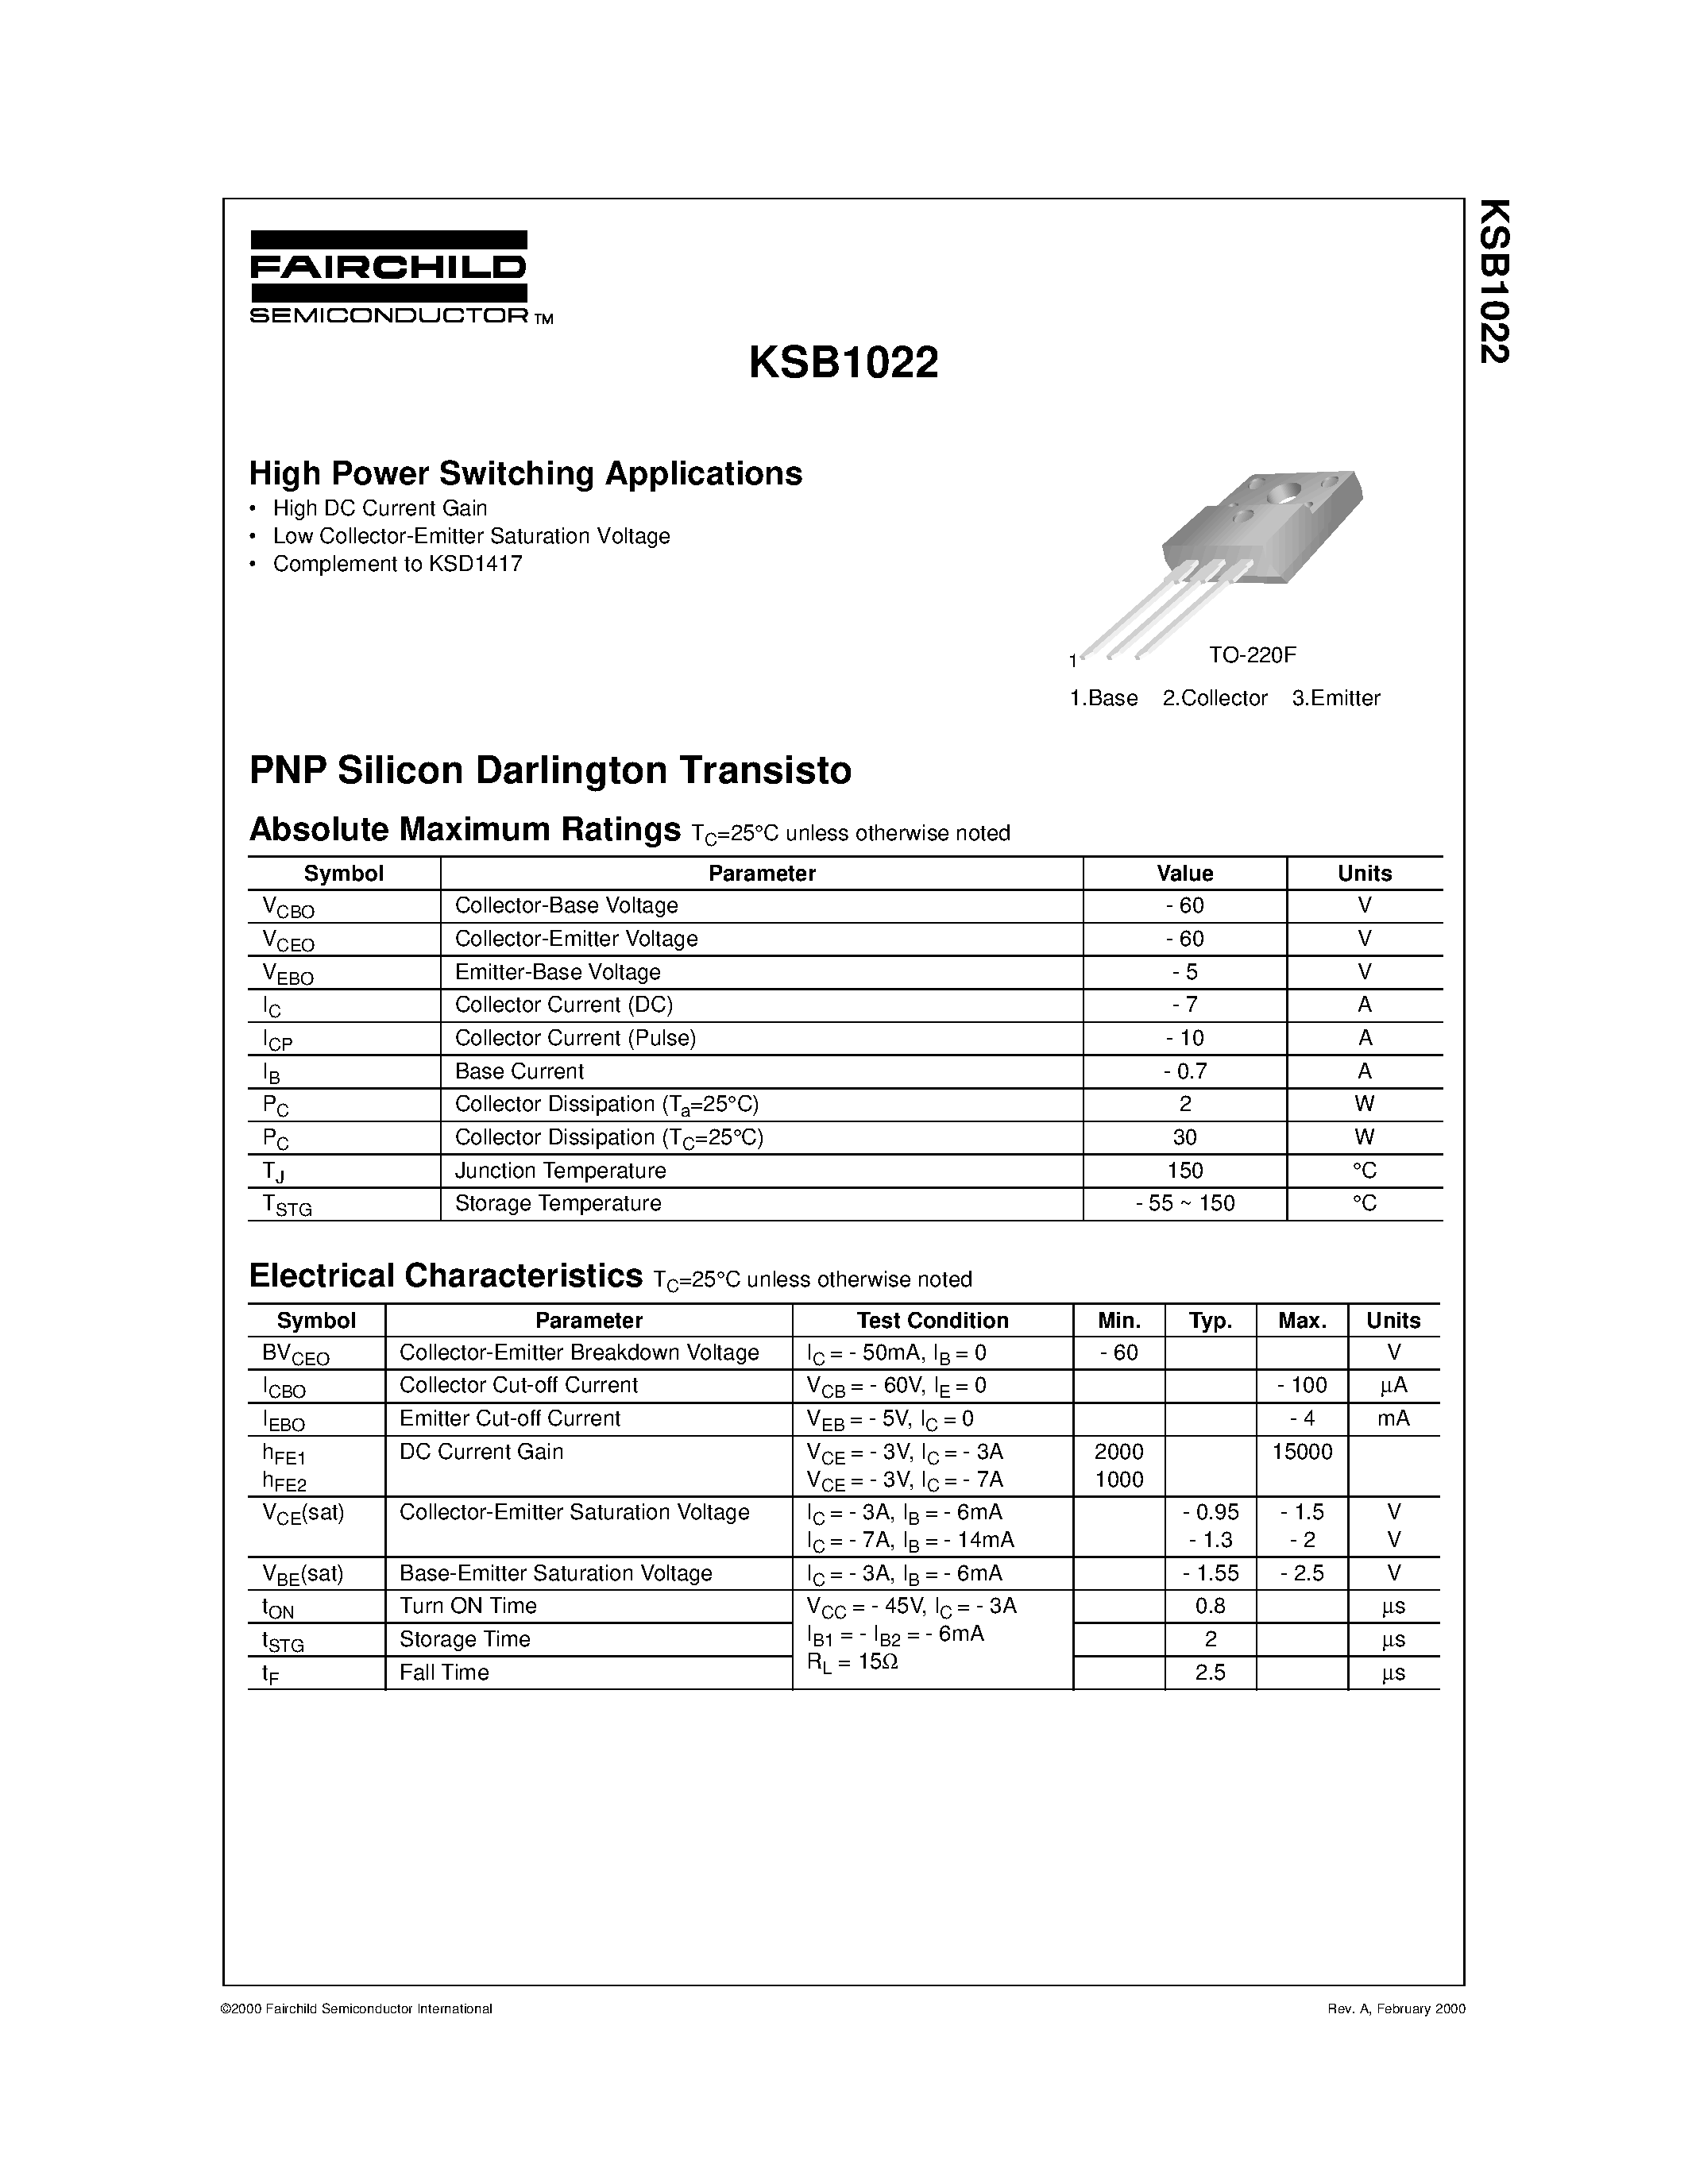 Datasheet KSB1022 - High Power Switching Applications page 1